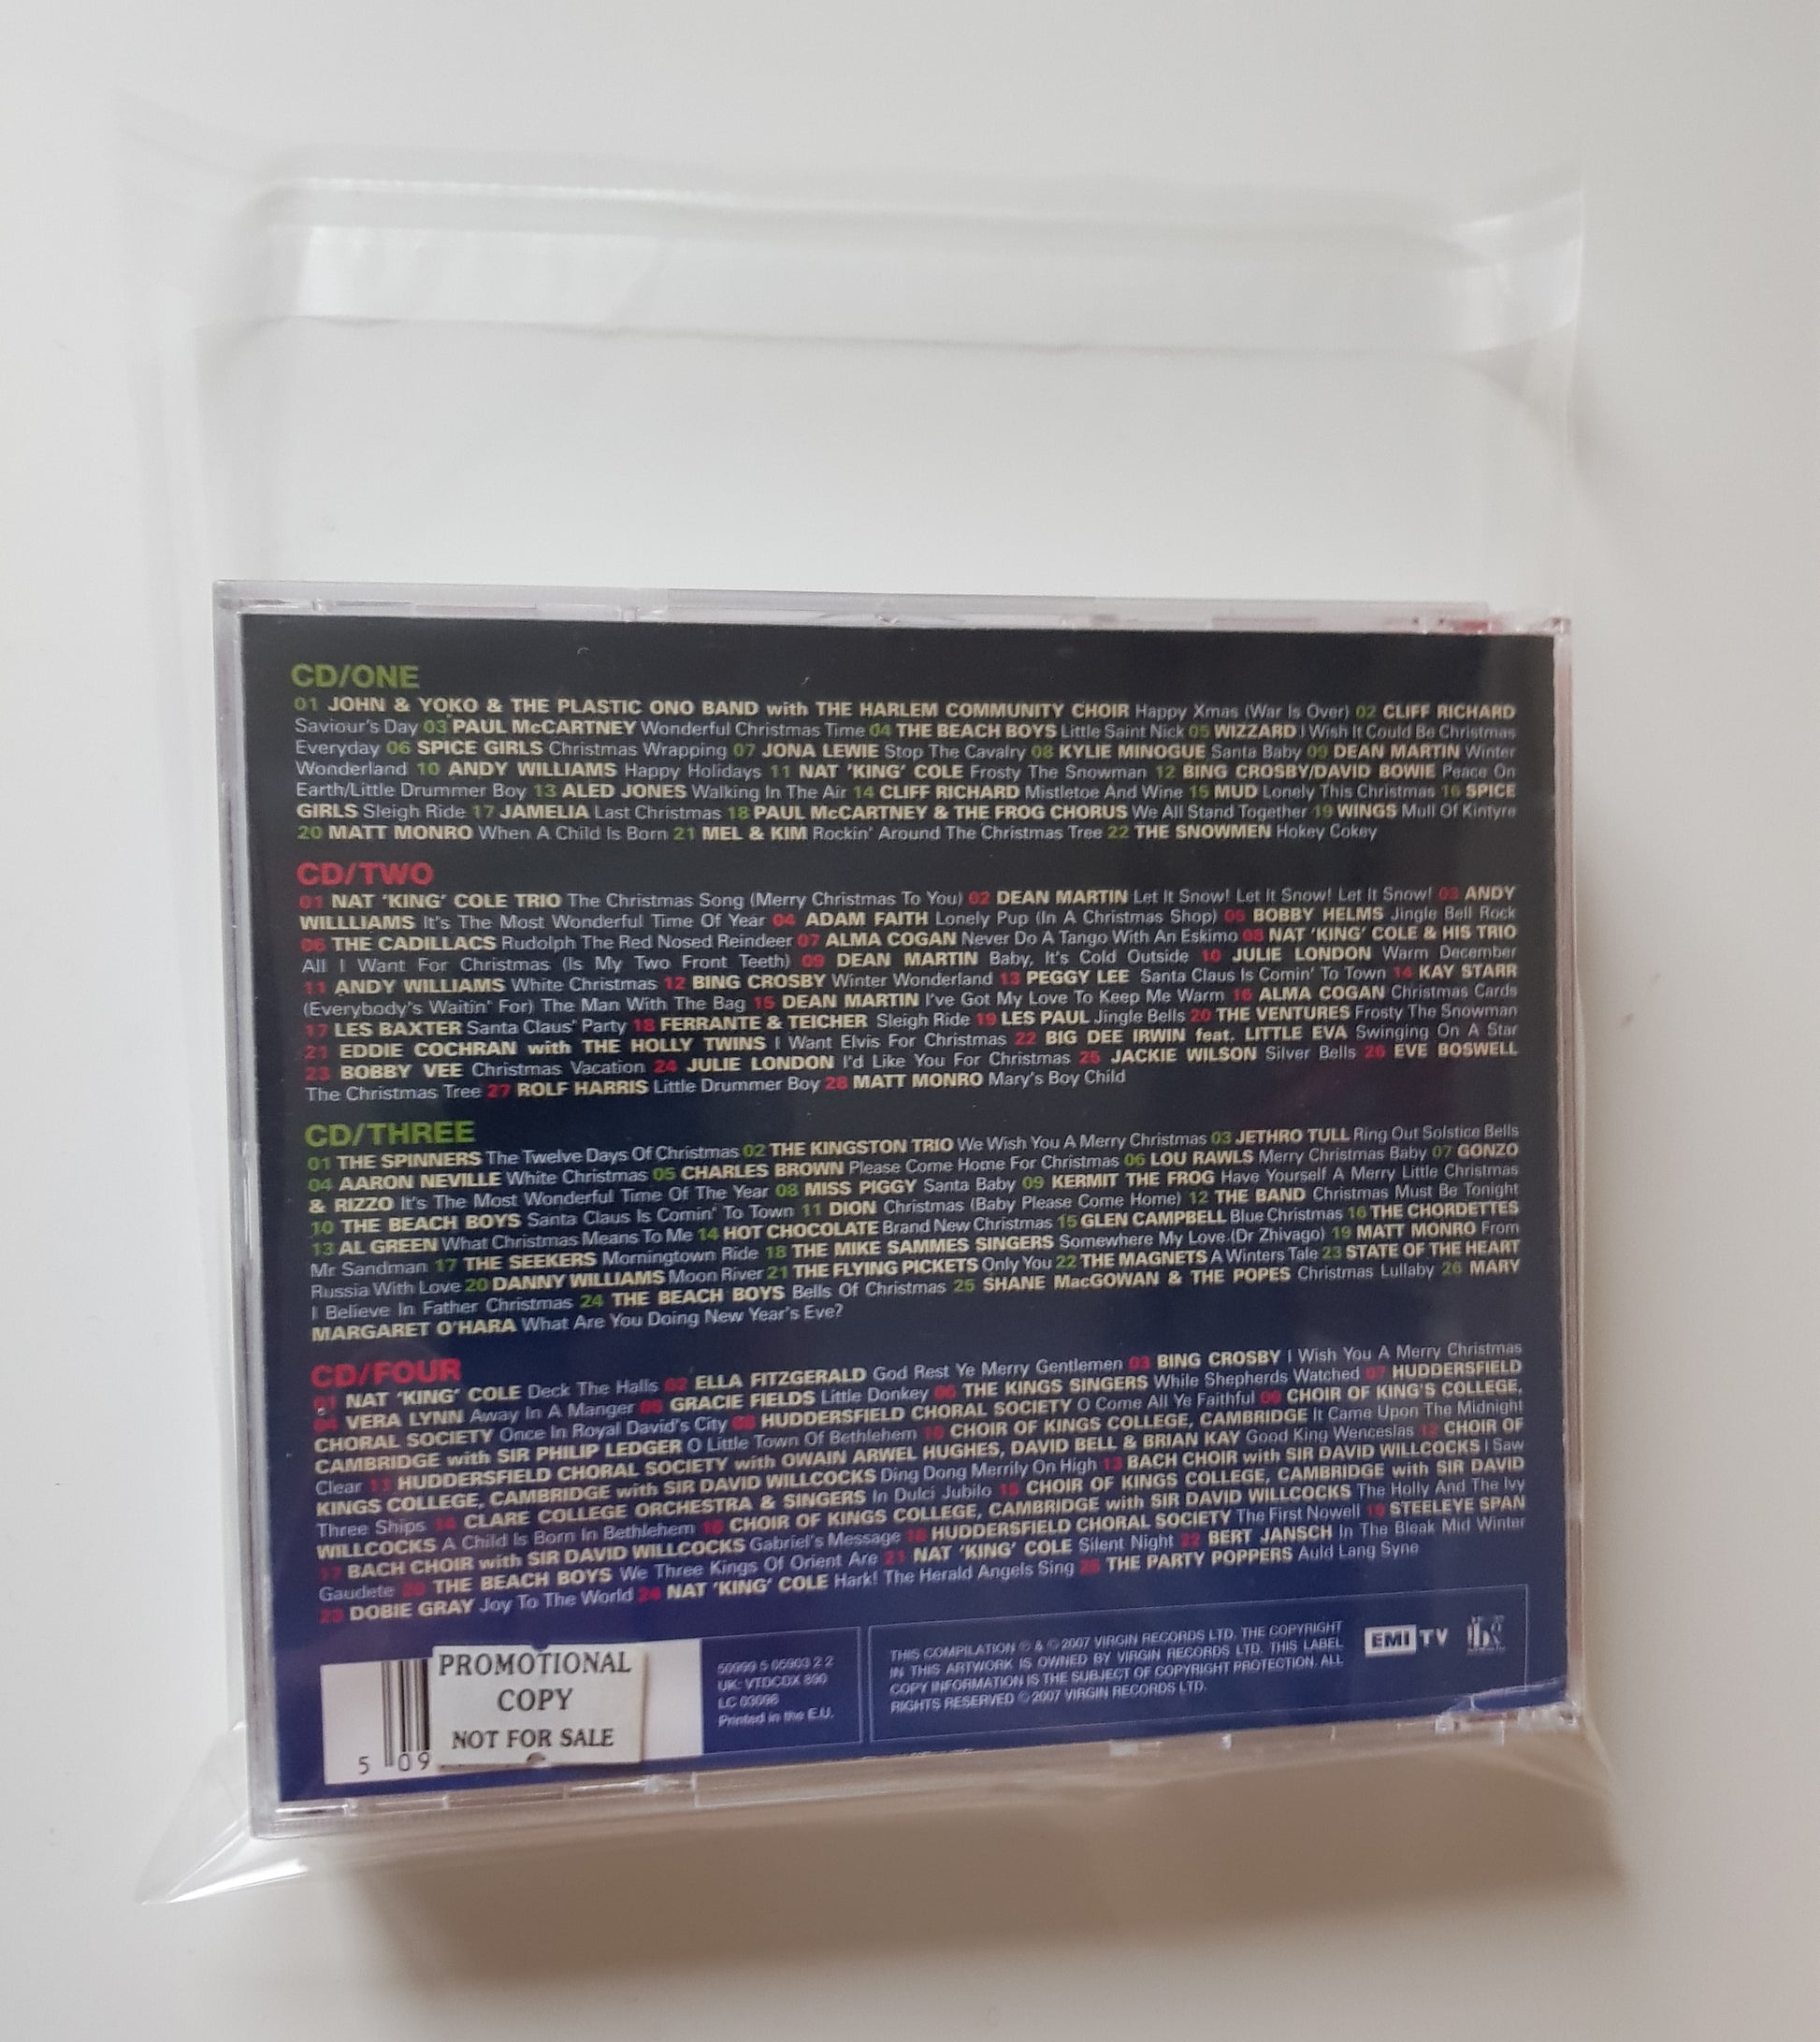 CD_Fatboy_Double_Resealable_Protective_Sleeves